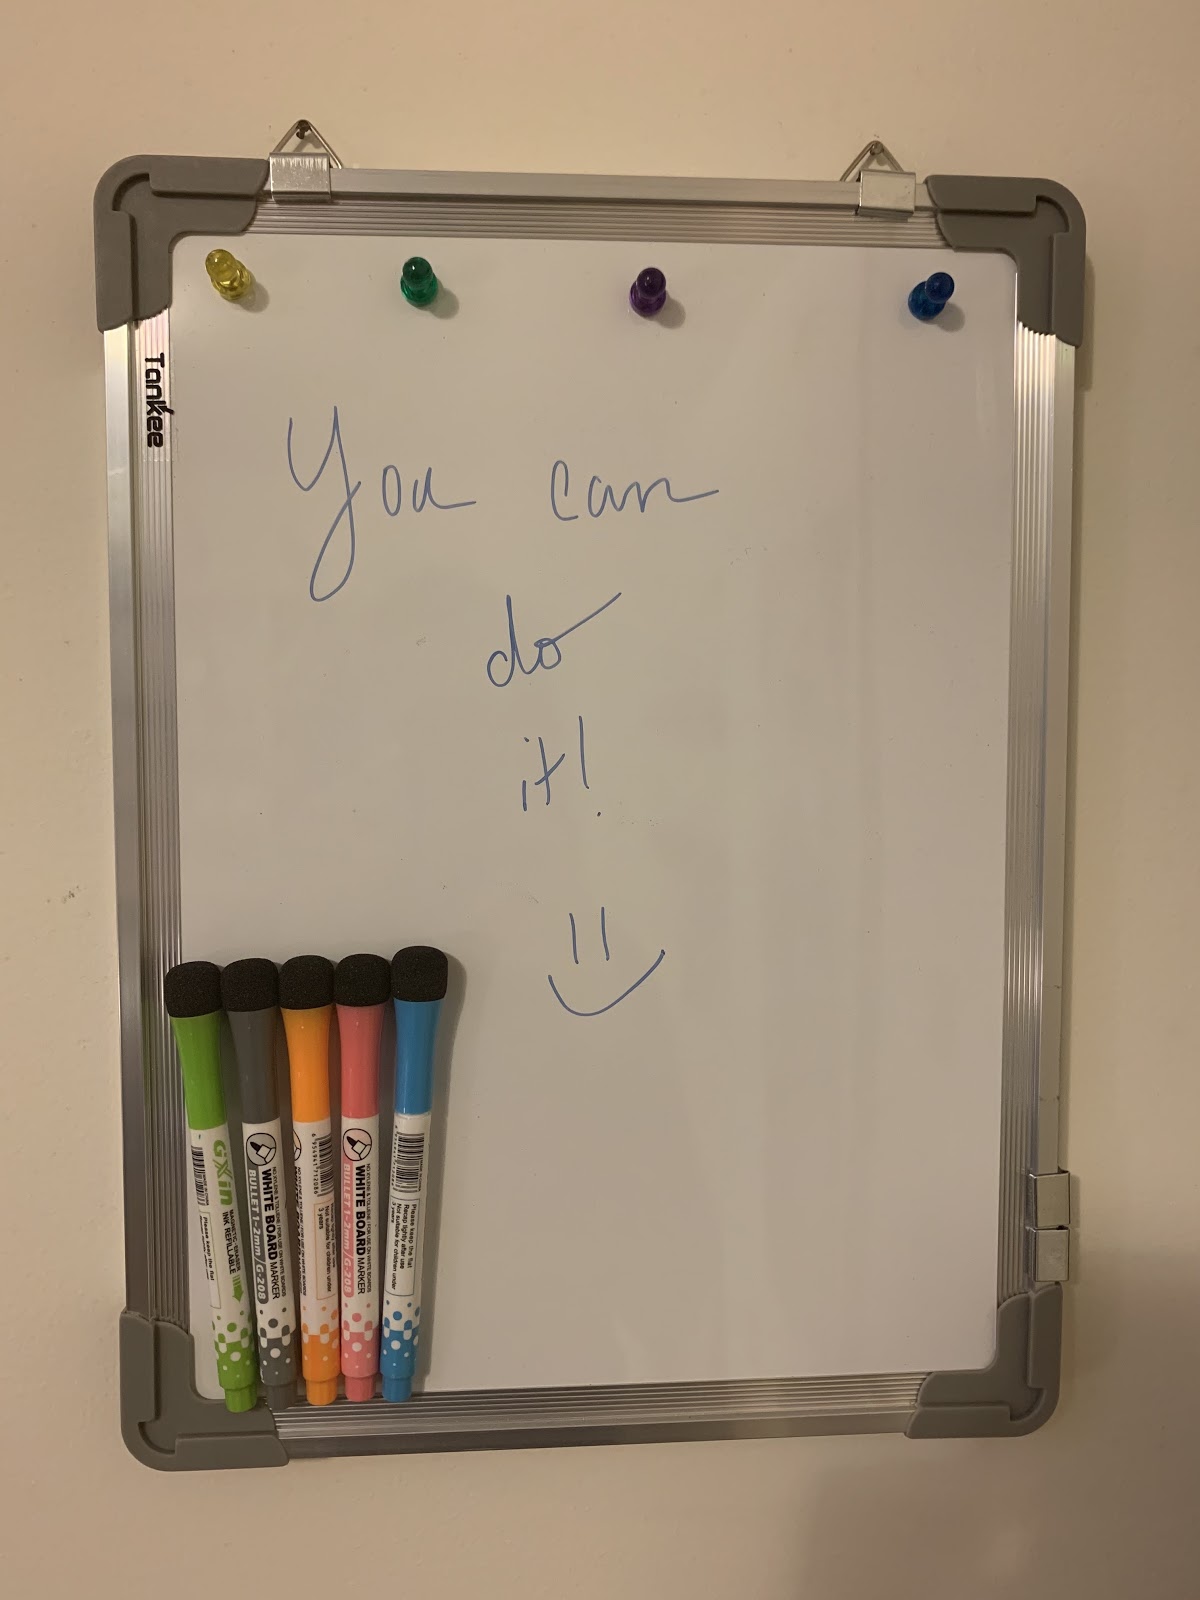 A whiteboard with a message hangs on a wall with five colored markers. The message says "You can do it!" with a smiley face.